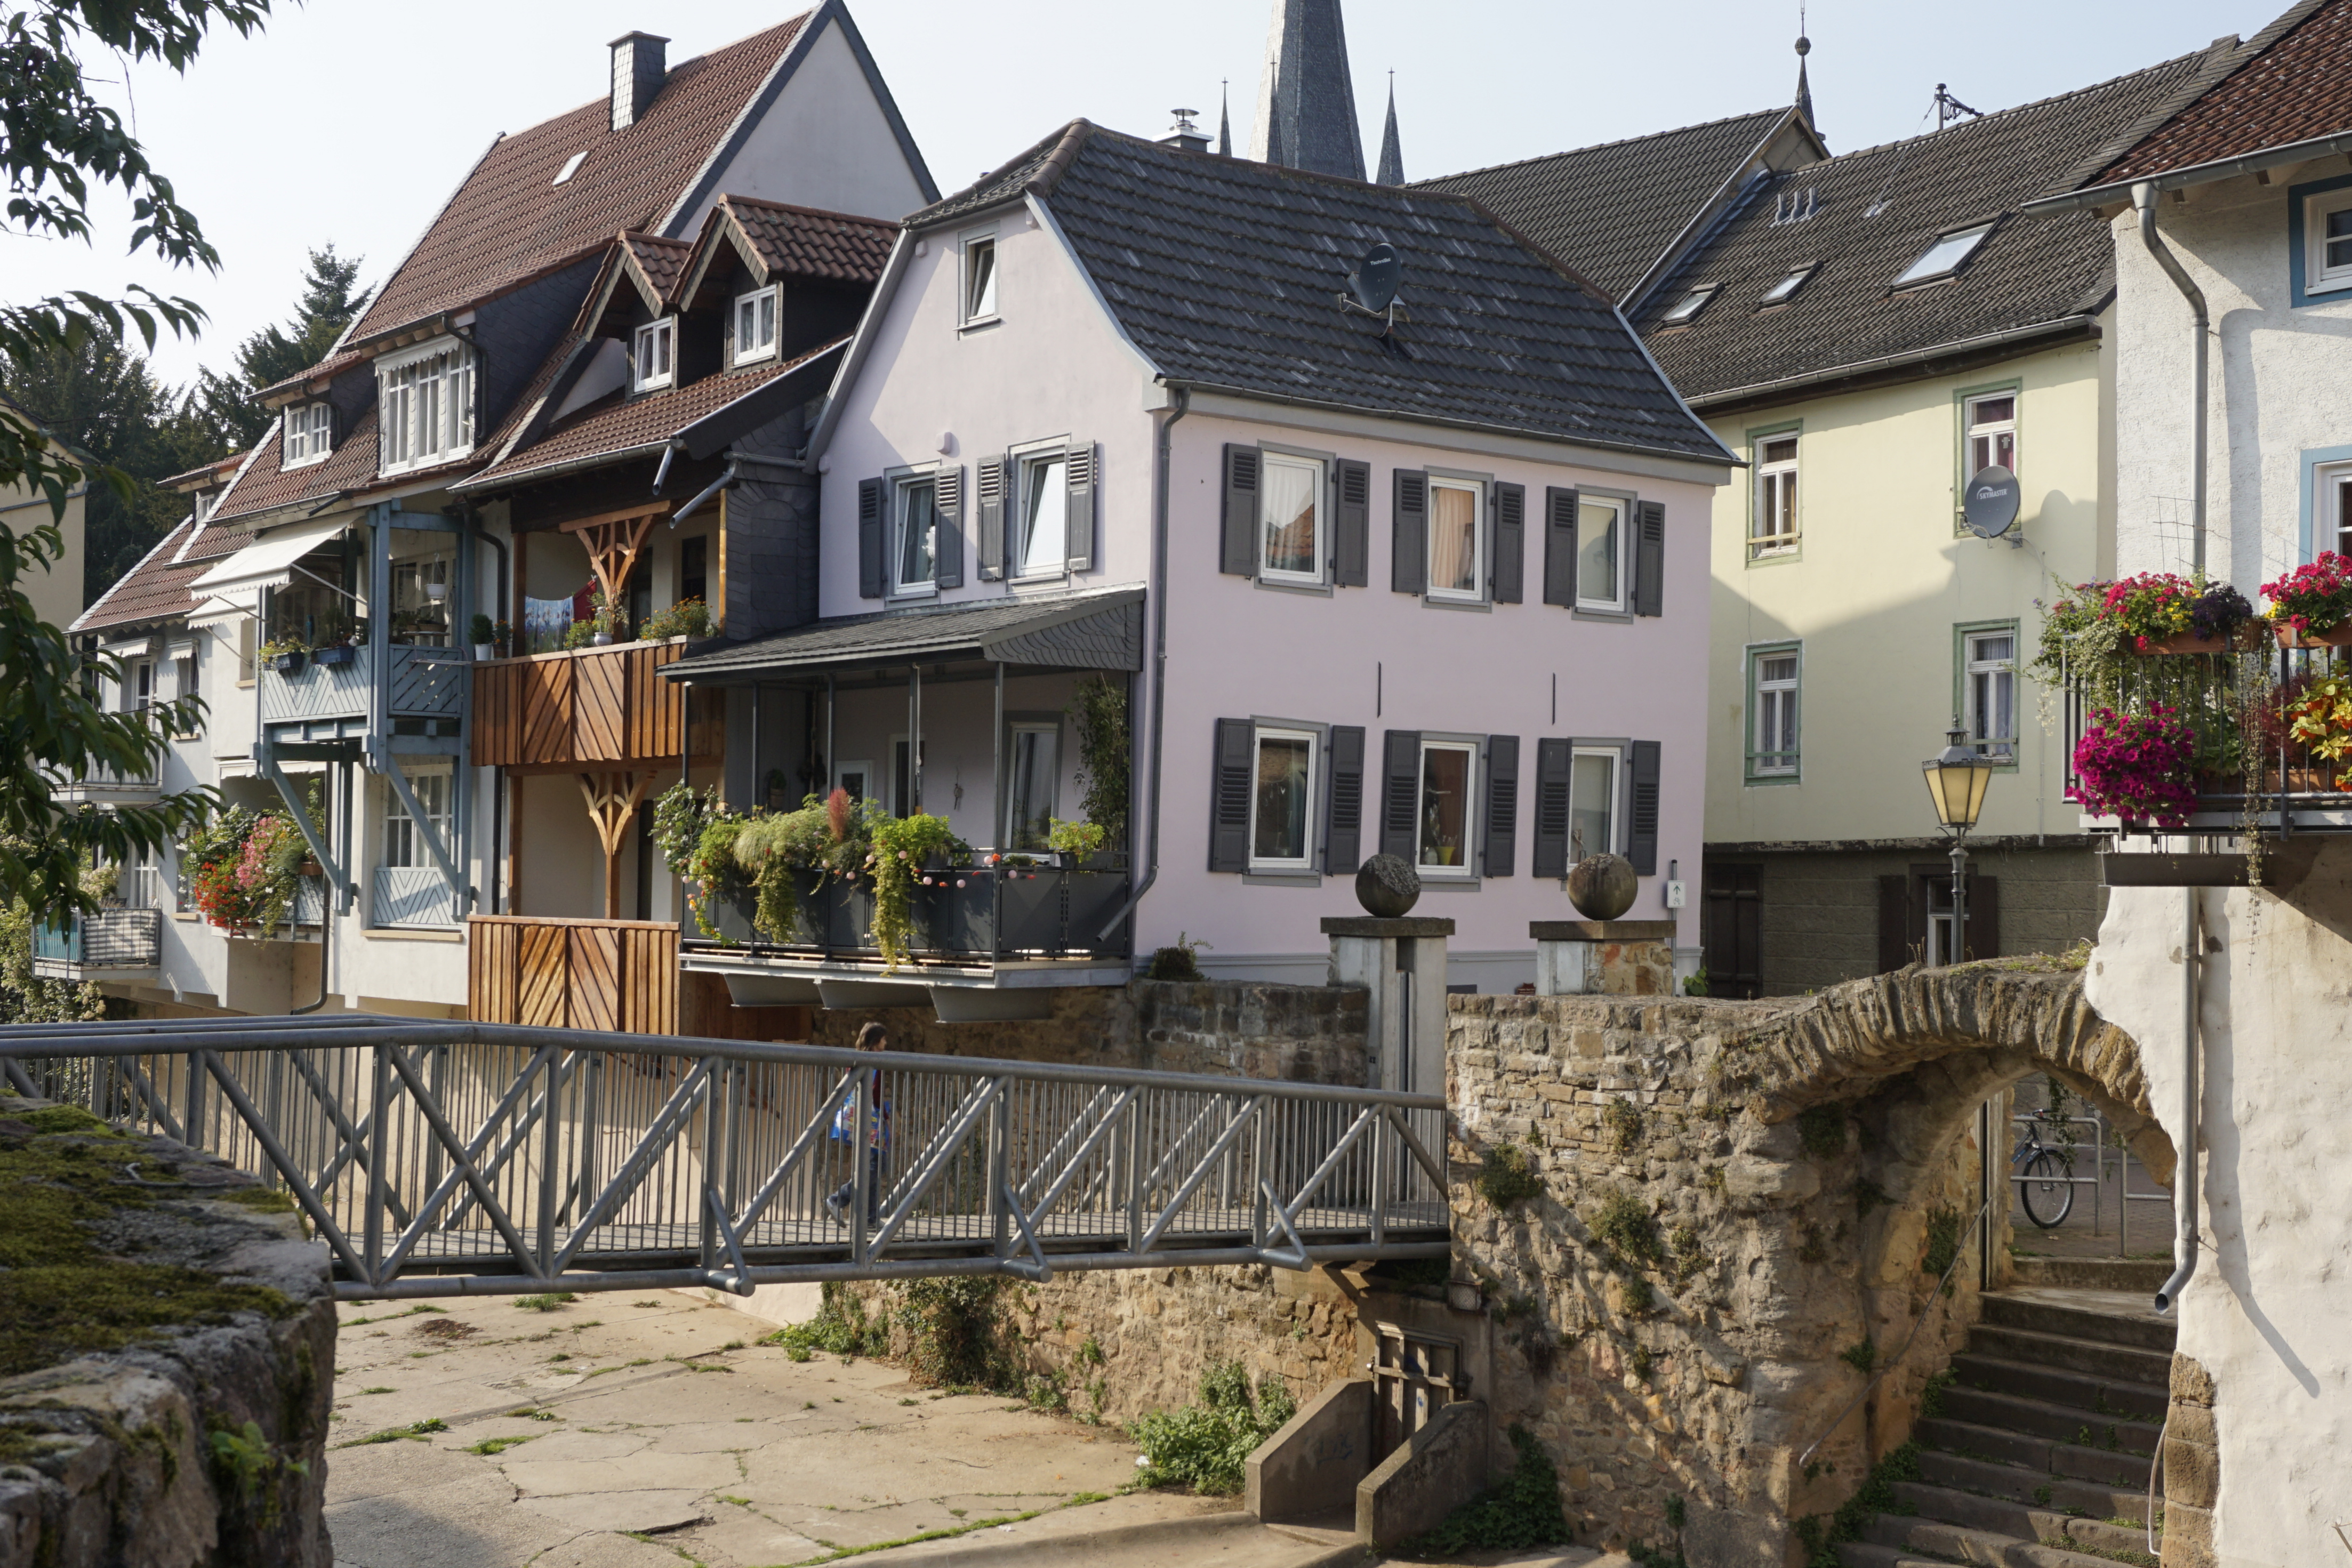 Little Venice River Side - Cozy little house - Houses for Rent in Bad  Kreuznach, Rheinland-Pfalz, Germany - Airbnb